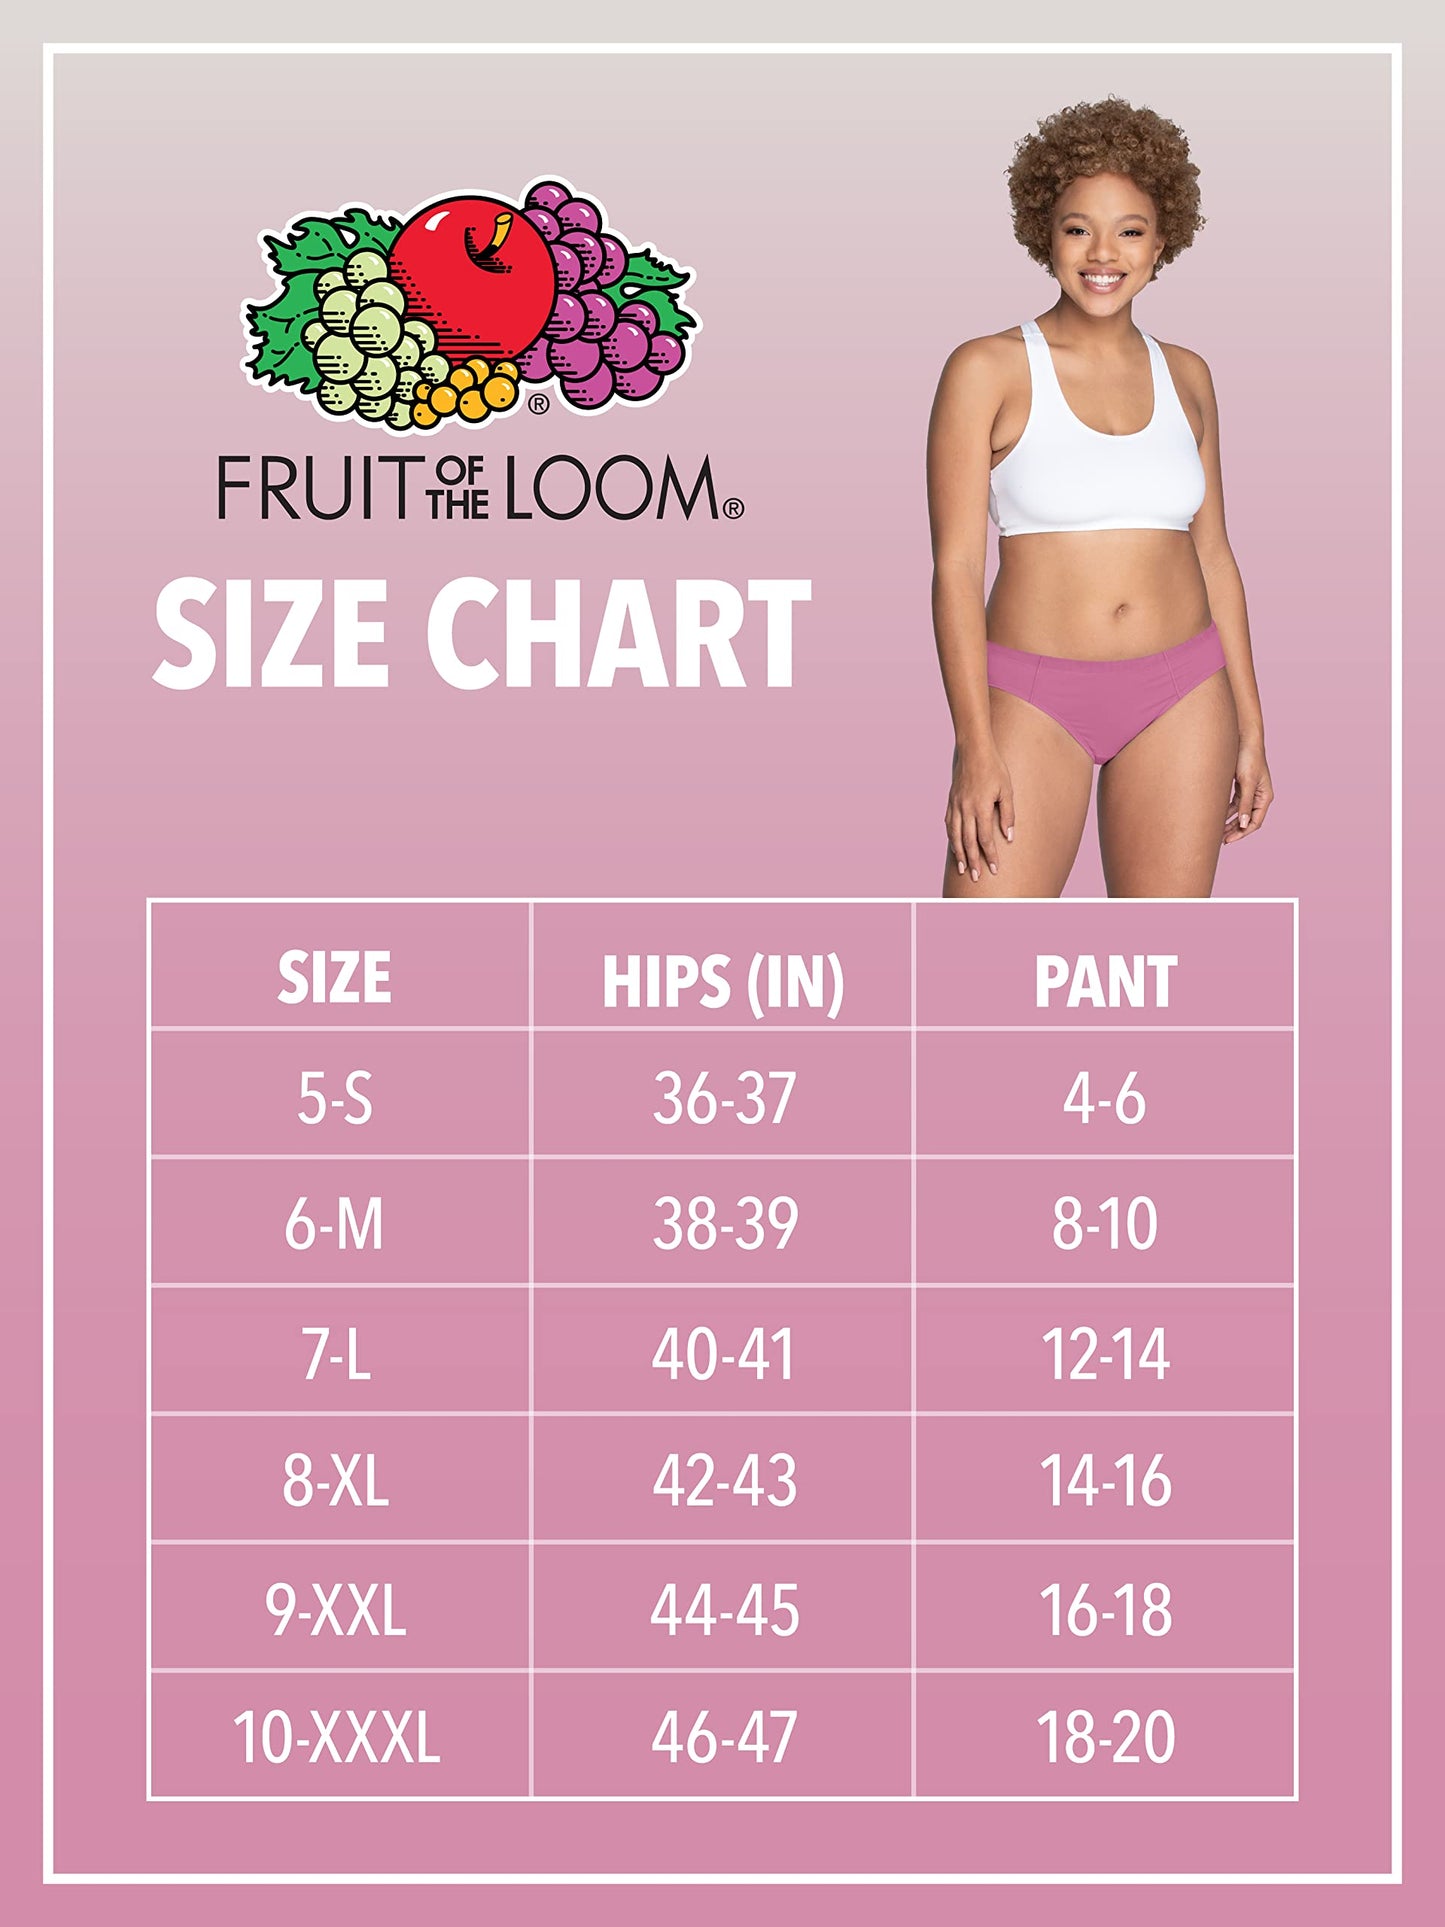 Fruit of the Loom Women's 360 Stretch Cotton Underwear, Available in Plus Sizes, 6-Pack Bikini - Colors Vary